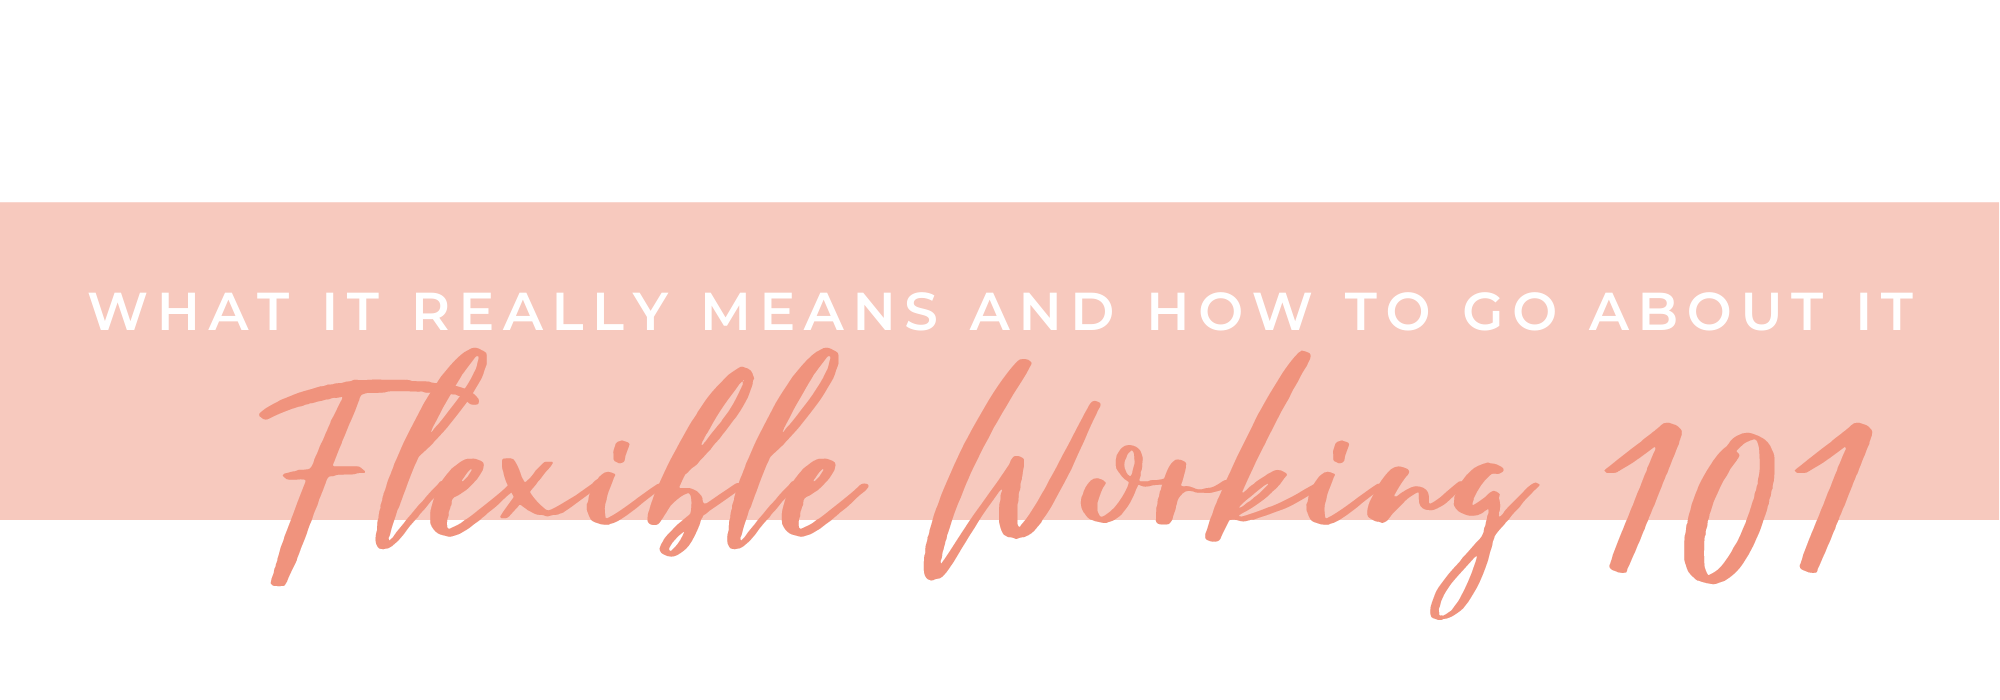 Flexible Working 101: what it really means and how to go about it